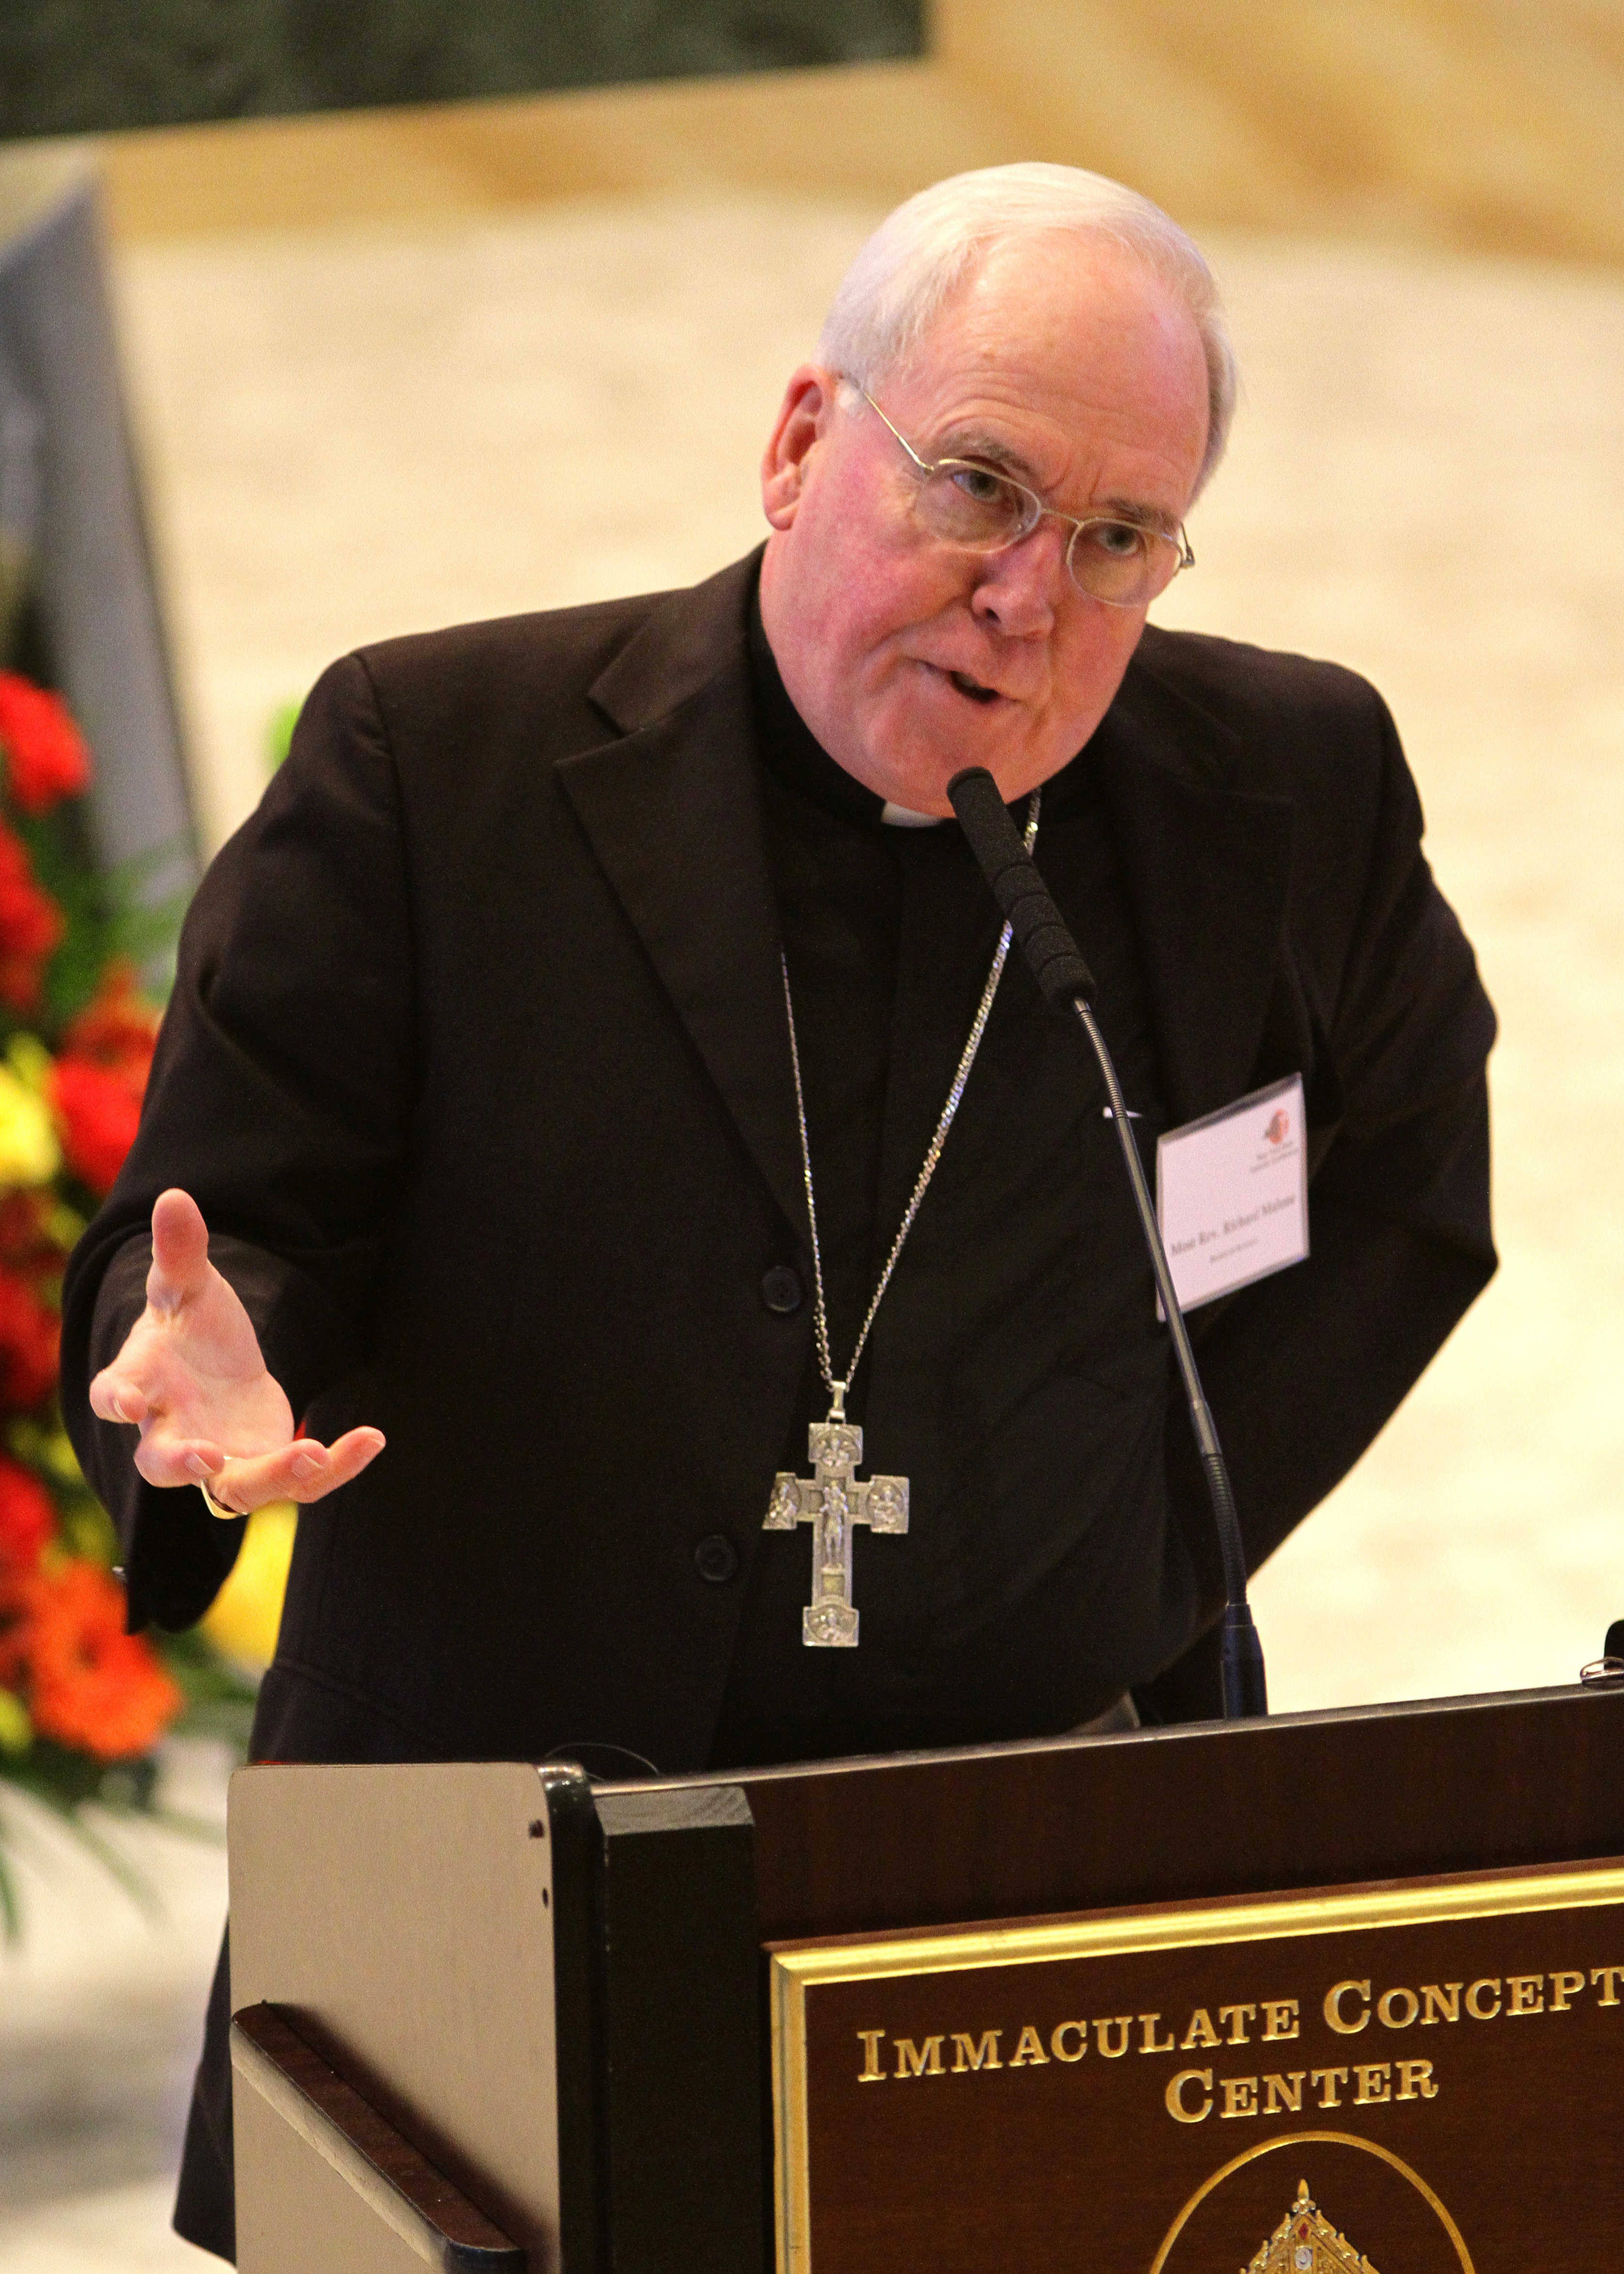 Bishop Richard J. Malone of the Roman Catholic Diocese of Buffalo, New York, gives a presentation during a gathering of New York state bishops and catechetical leaders at the Immaculate Conception Center in the Douglaston neighborhood of the Queens borough of New York, U.S., September 27, 2012. REUTERS/Gregory A. Shemitz